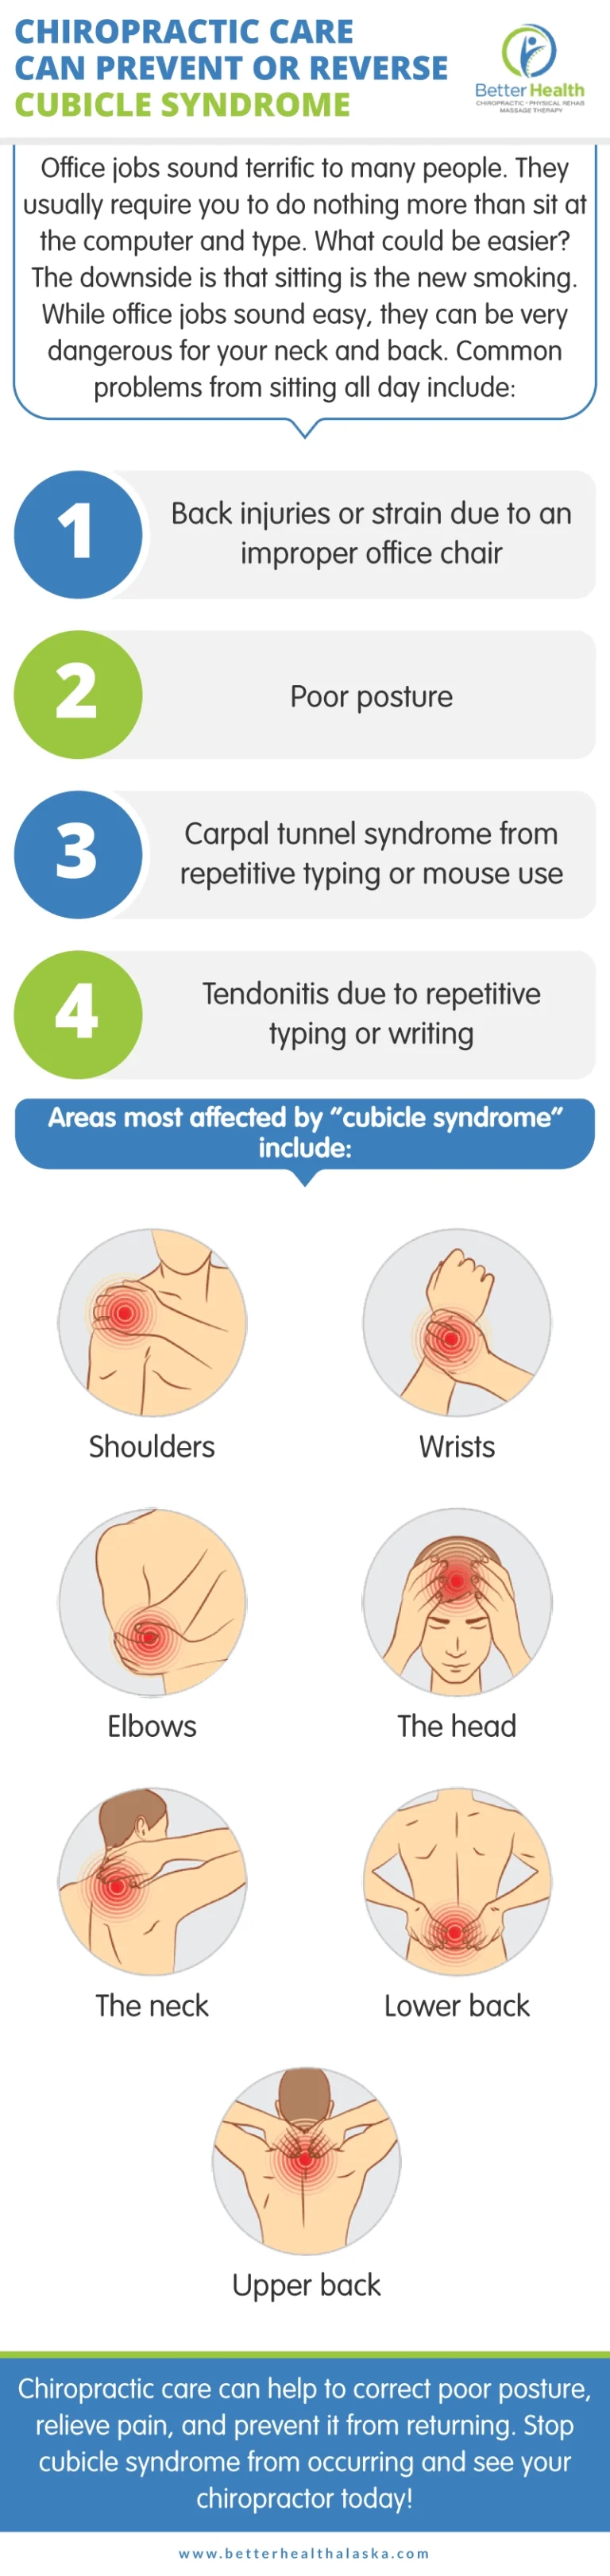 An infographic about prevention of cubicle syndrome with chiropractic care.